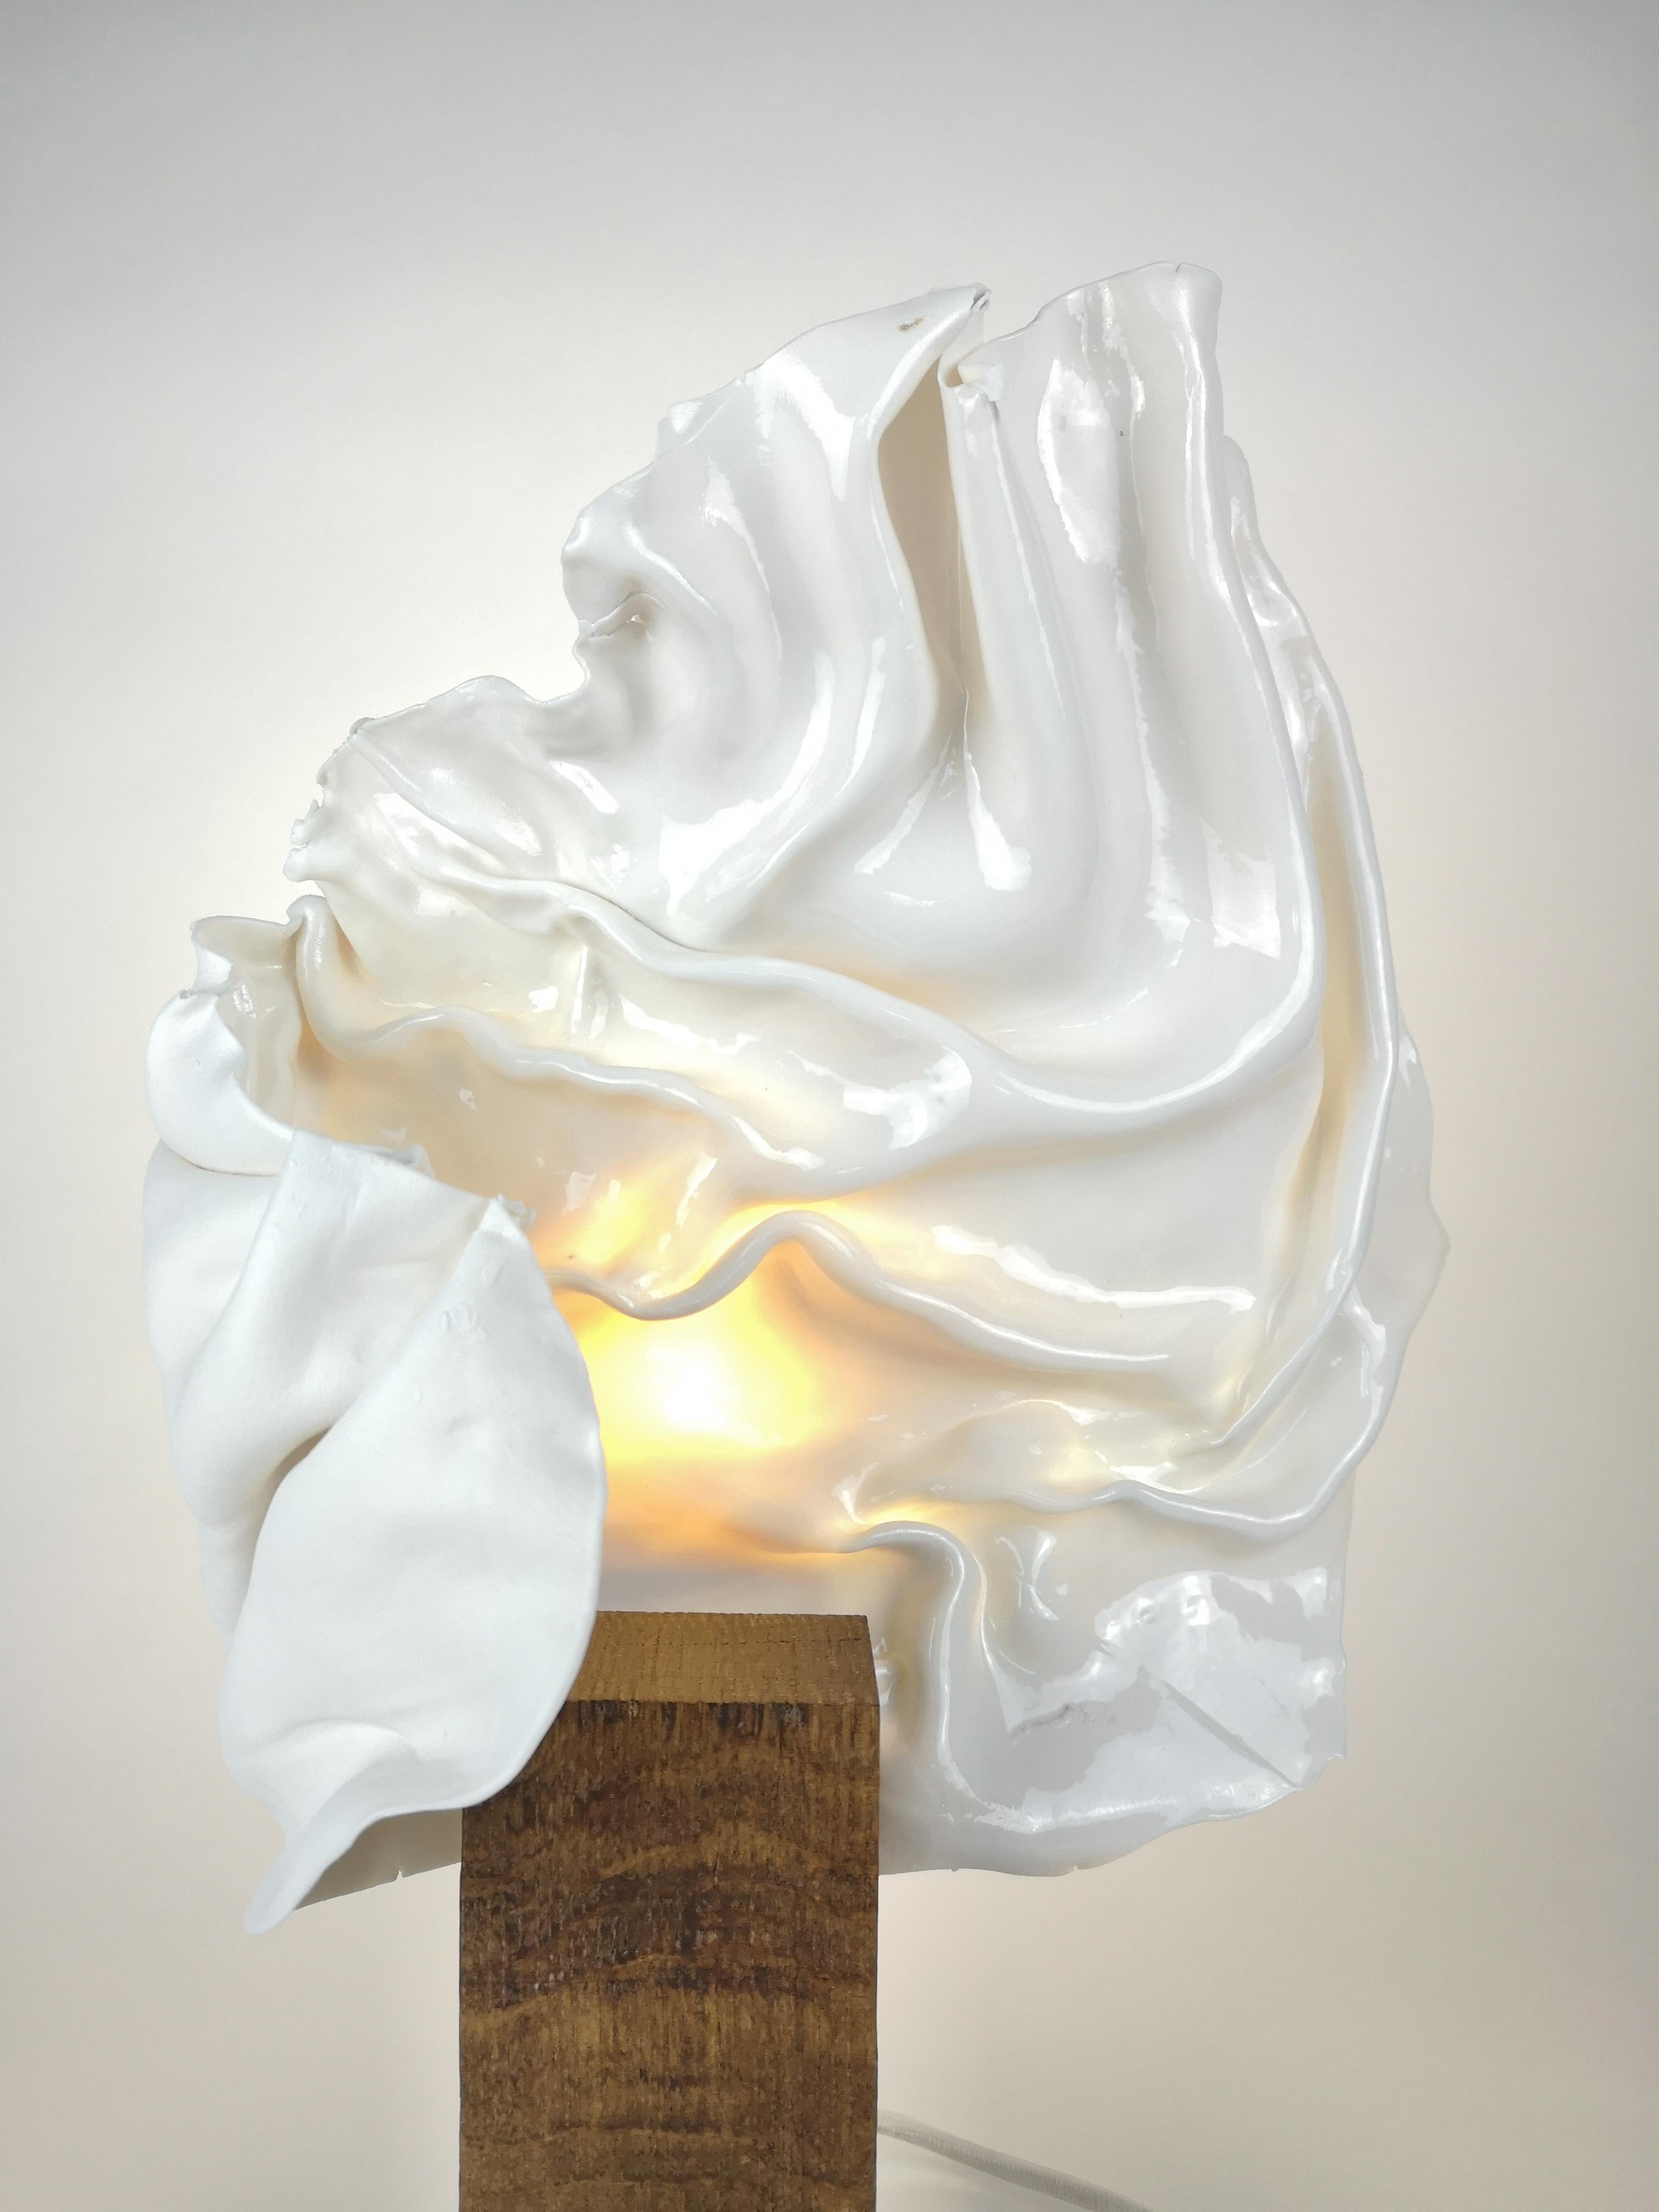 Vertical Elightened Drapery Sculpture by Dora Stanczel
One of a Kind.
Dimensions: D 15 x W 35 x H 40 cm.
Materials: Porcelain and wooden pedestal.

This sculpture includes a lighting system. Also available in a horizontal version. Please contact